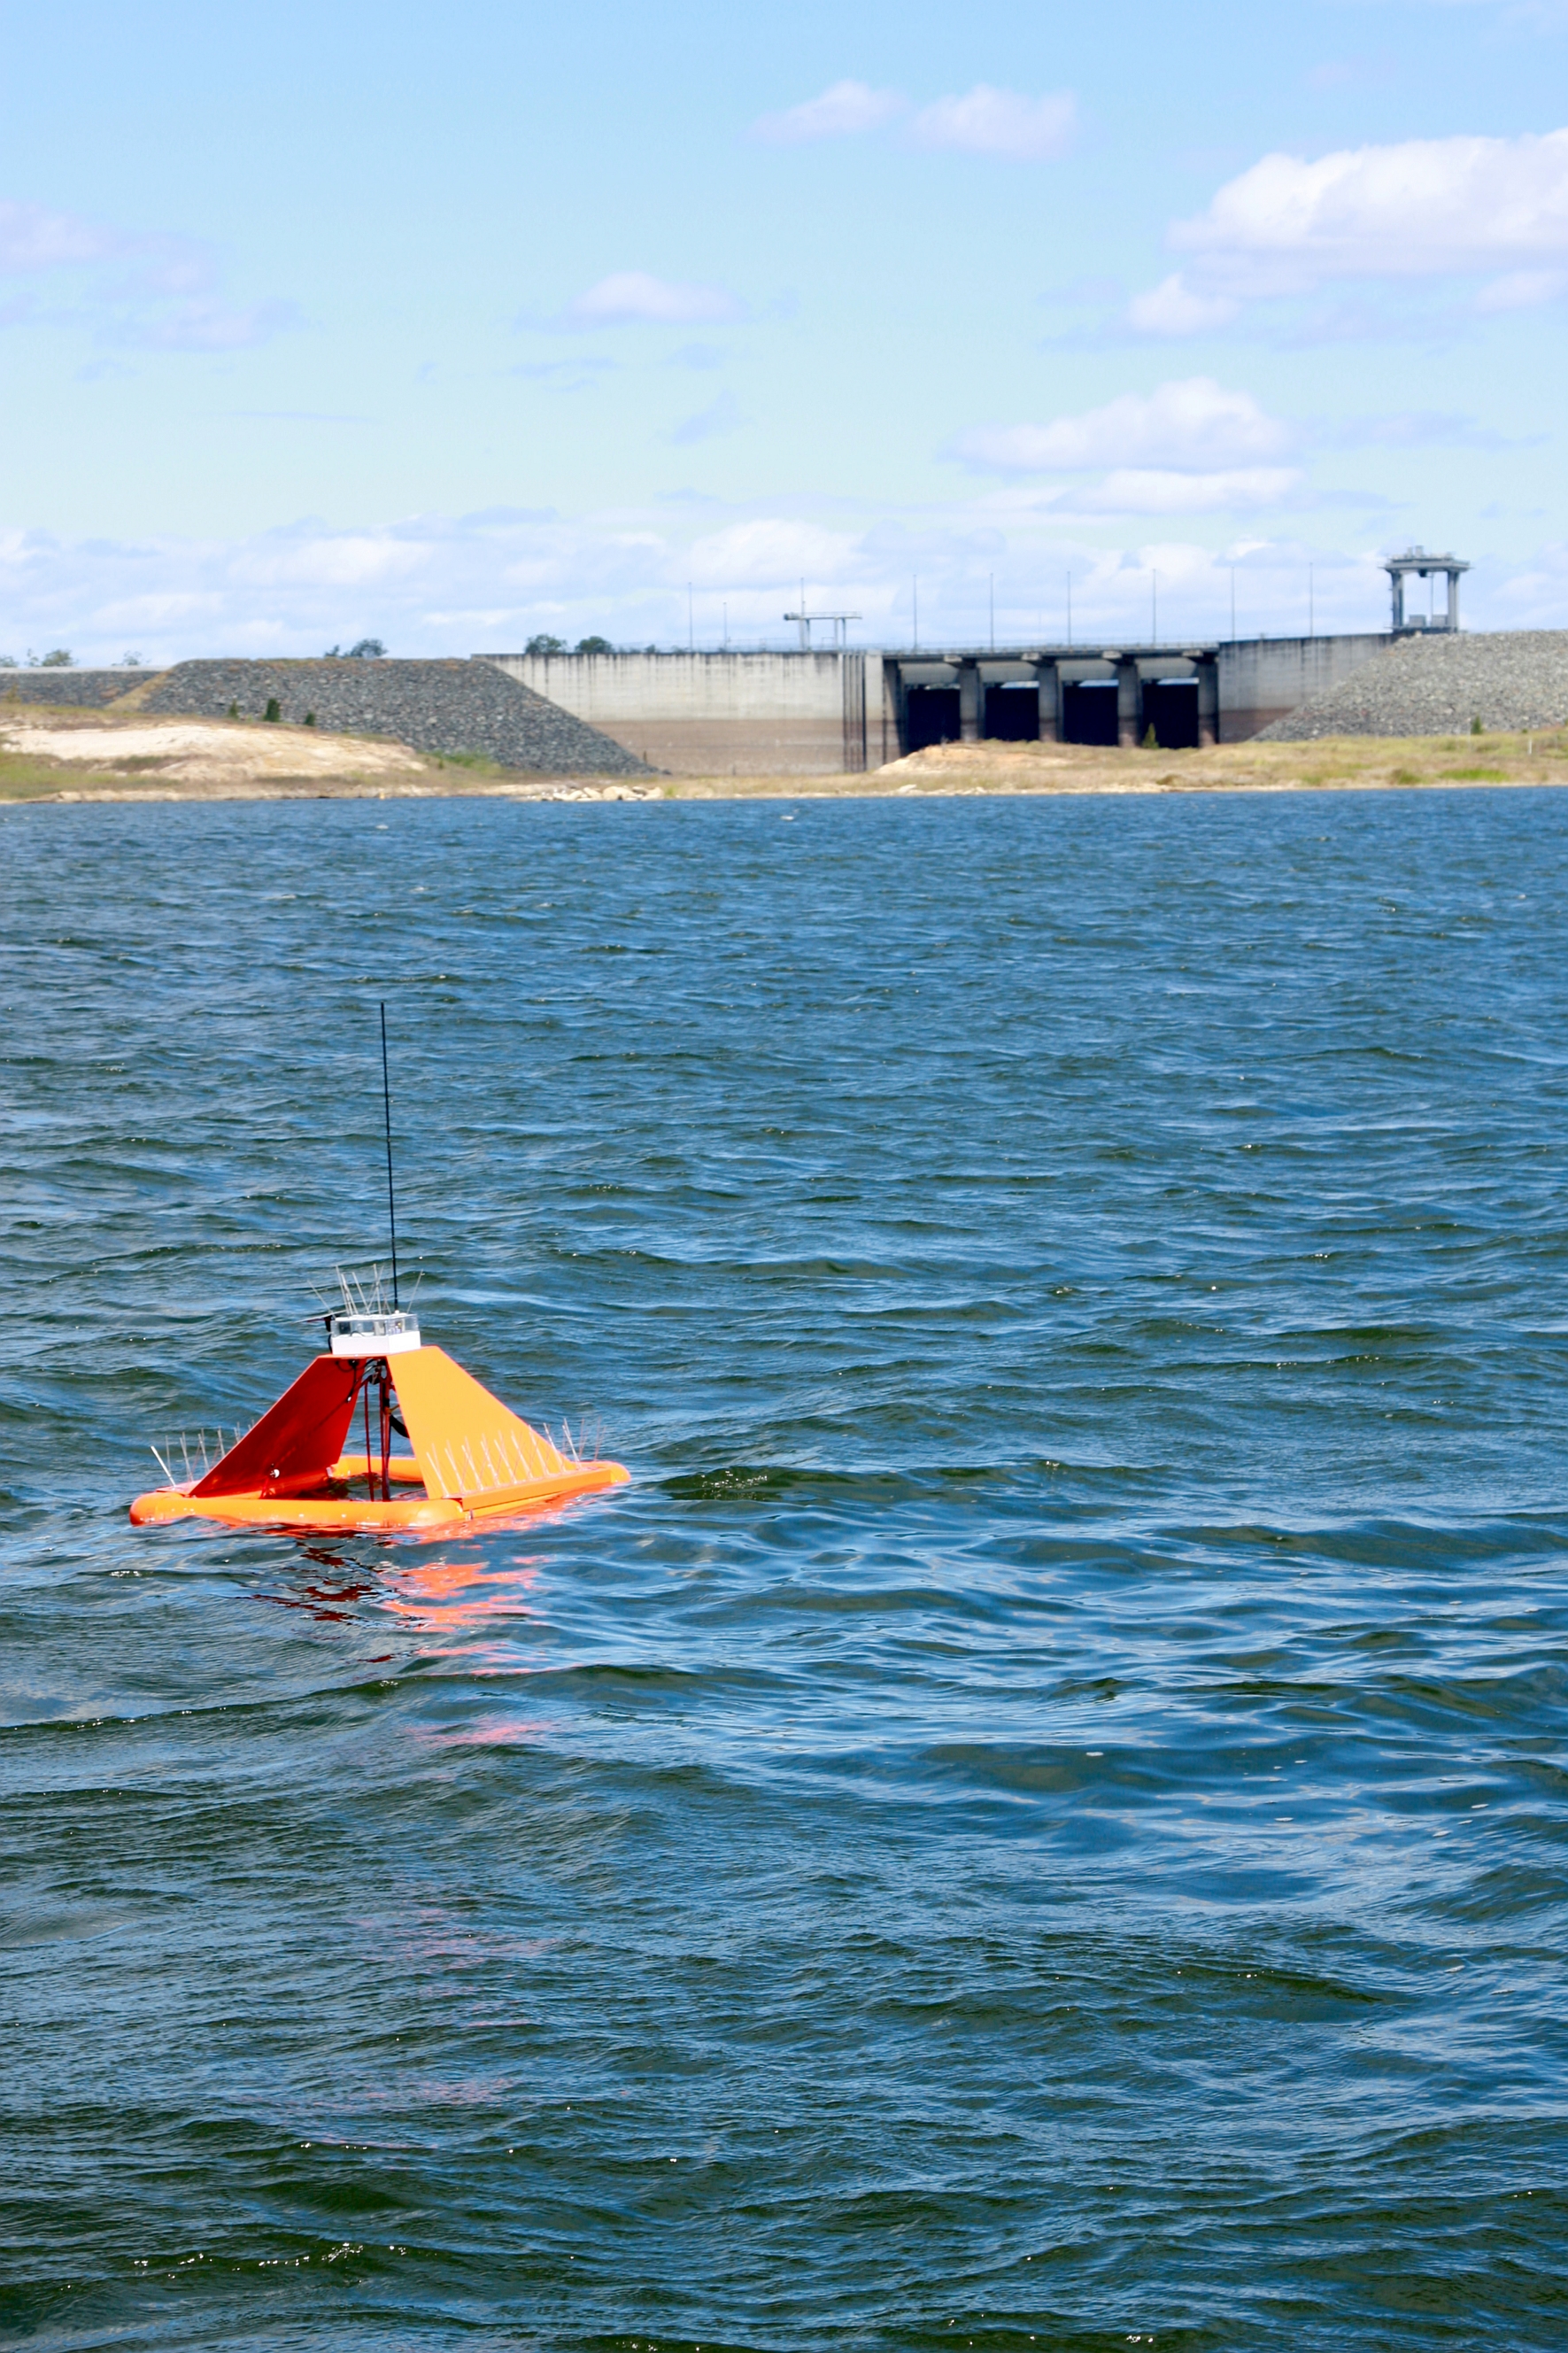 In a bay in Queensland, Australia, a floating remote sensor tracks environmental conditions 